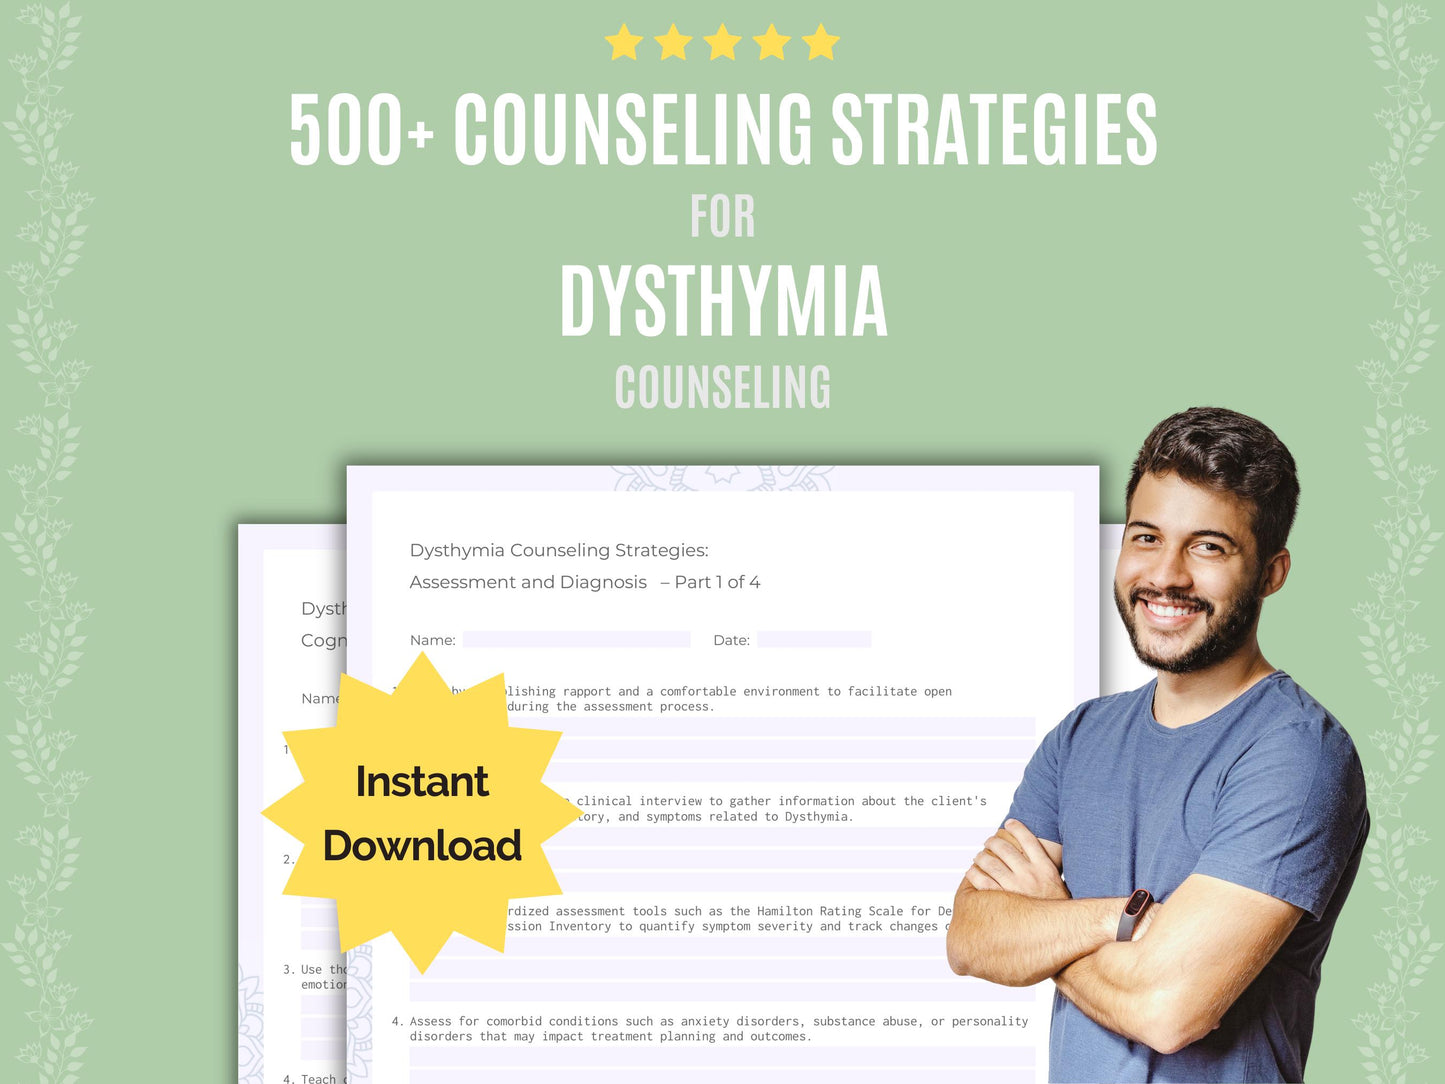 Dysthymia Counseling Strategies